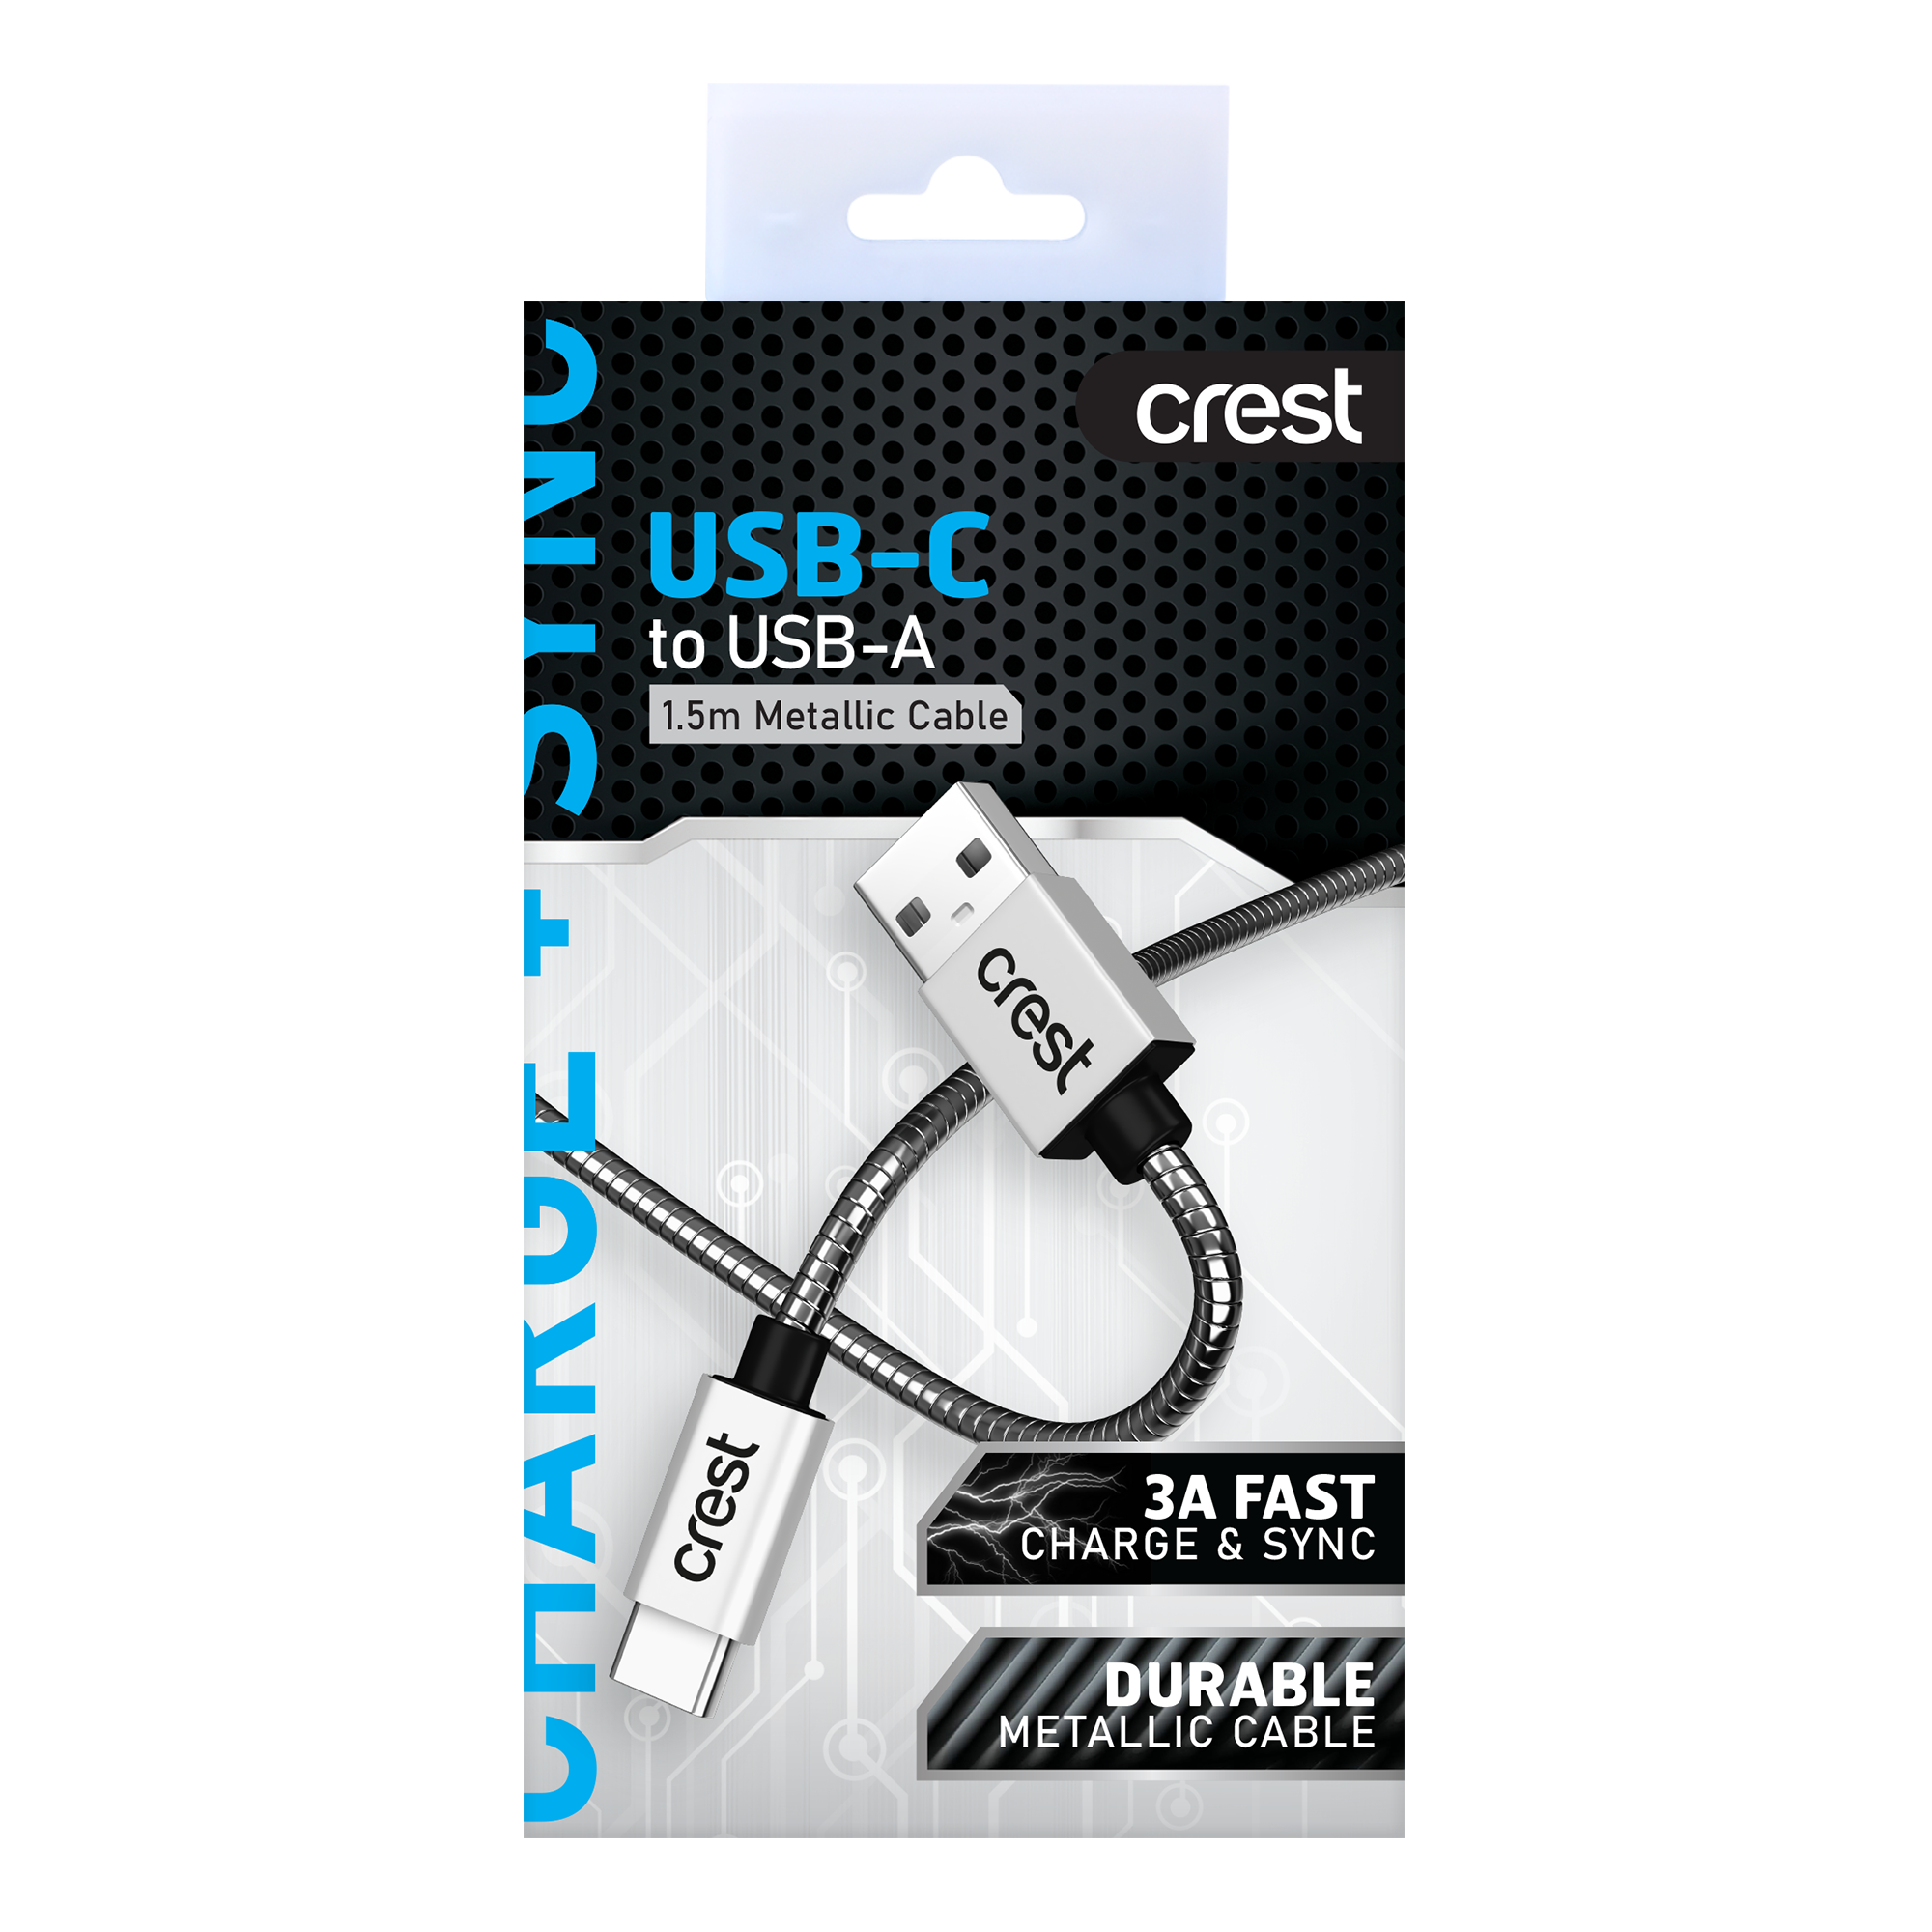 USB-C to USB-A Steel Cable 1.5M - Grey